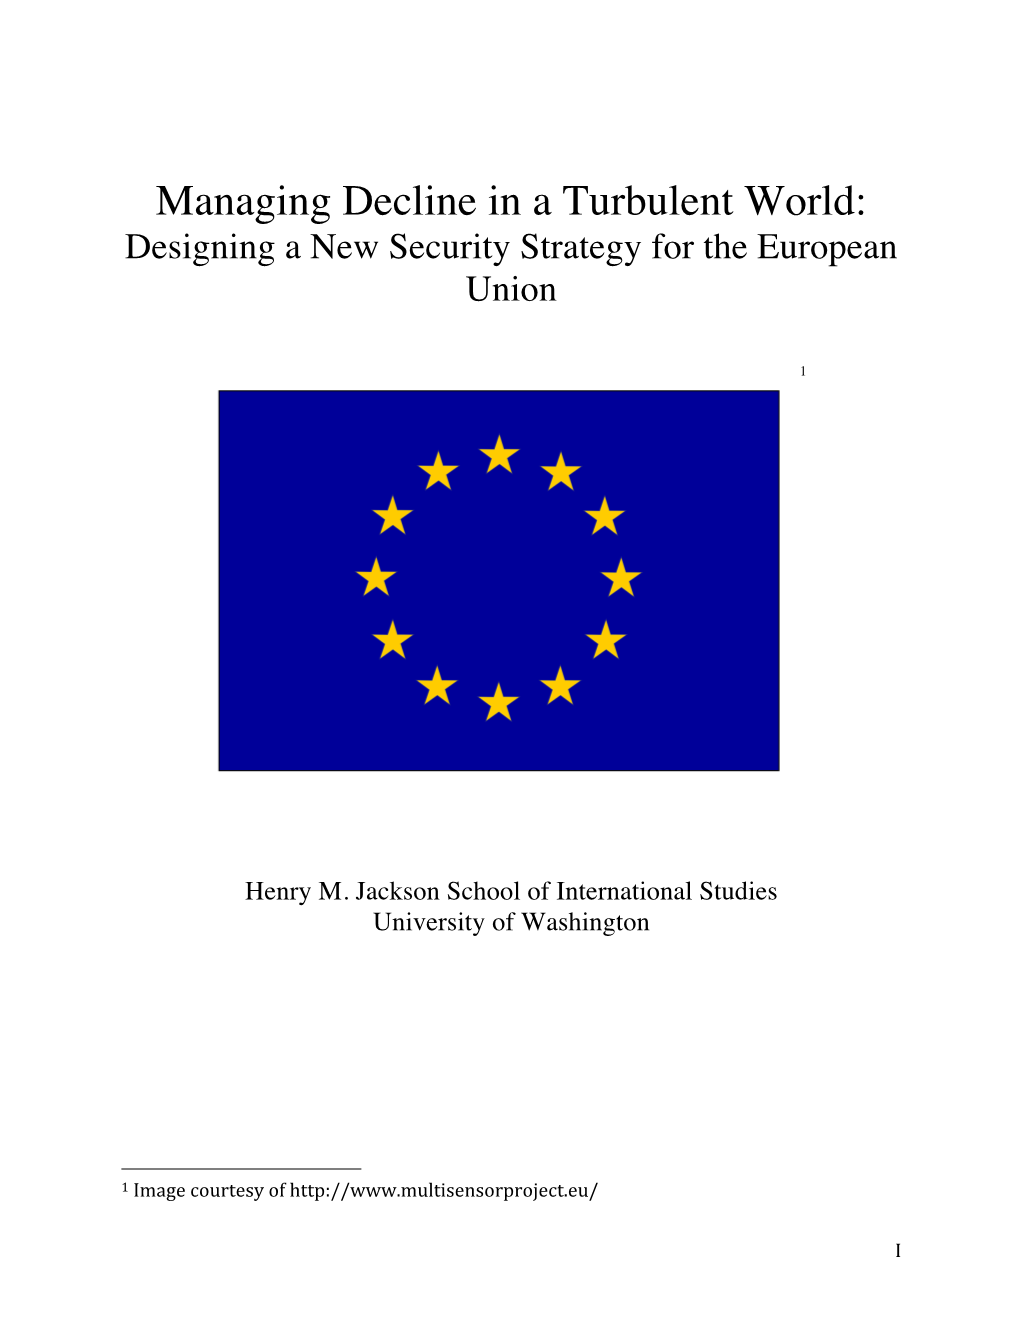 Managing Decline in a Turbulent World: Designing a New Security Strategy for the European Union